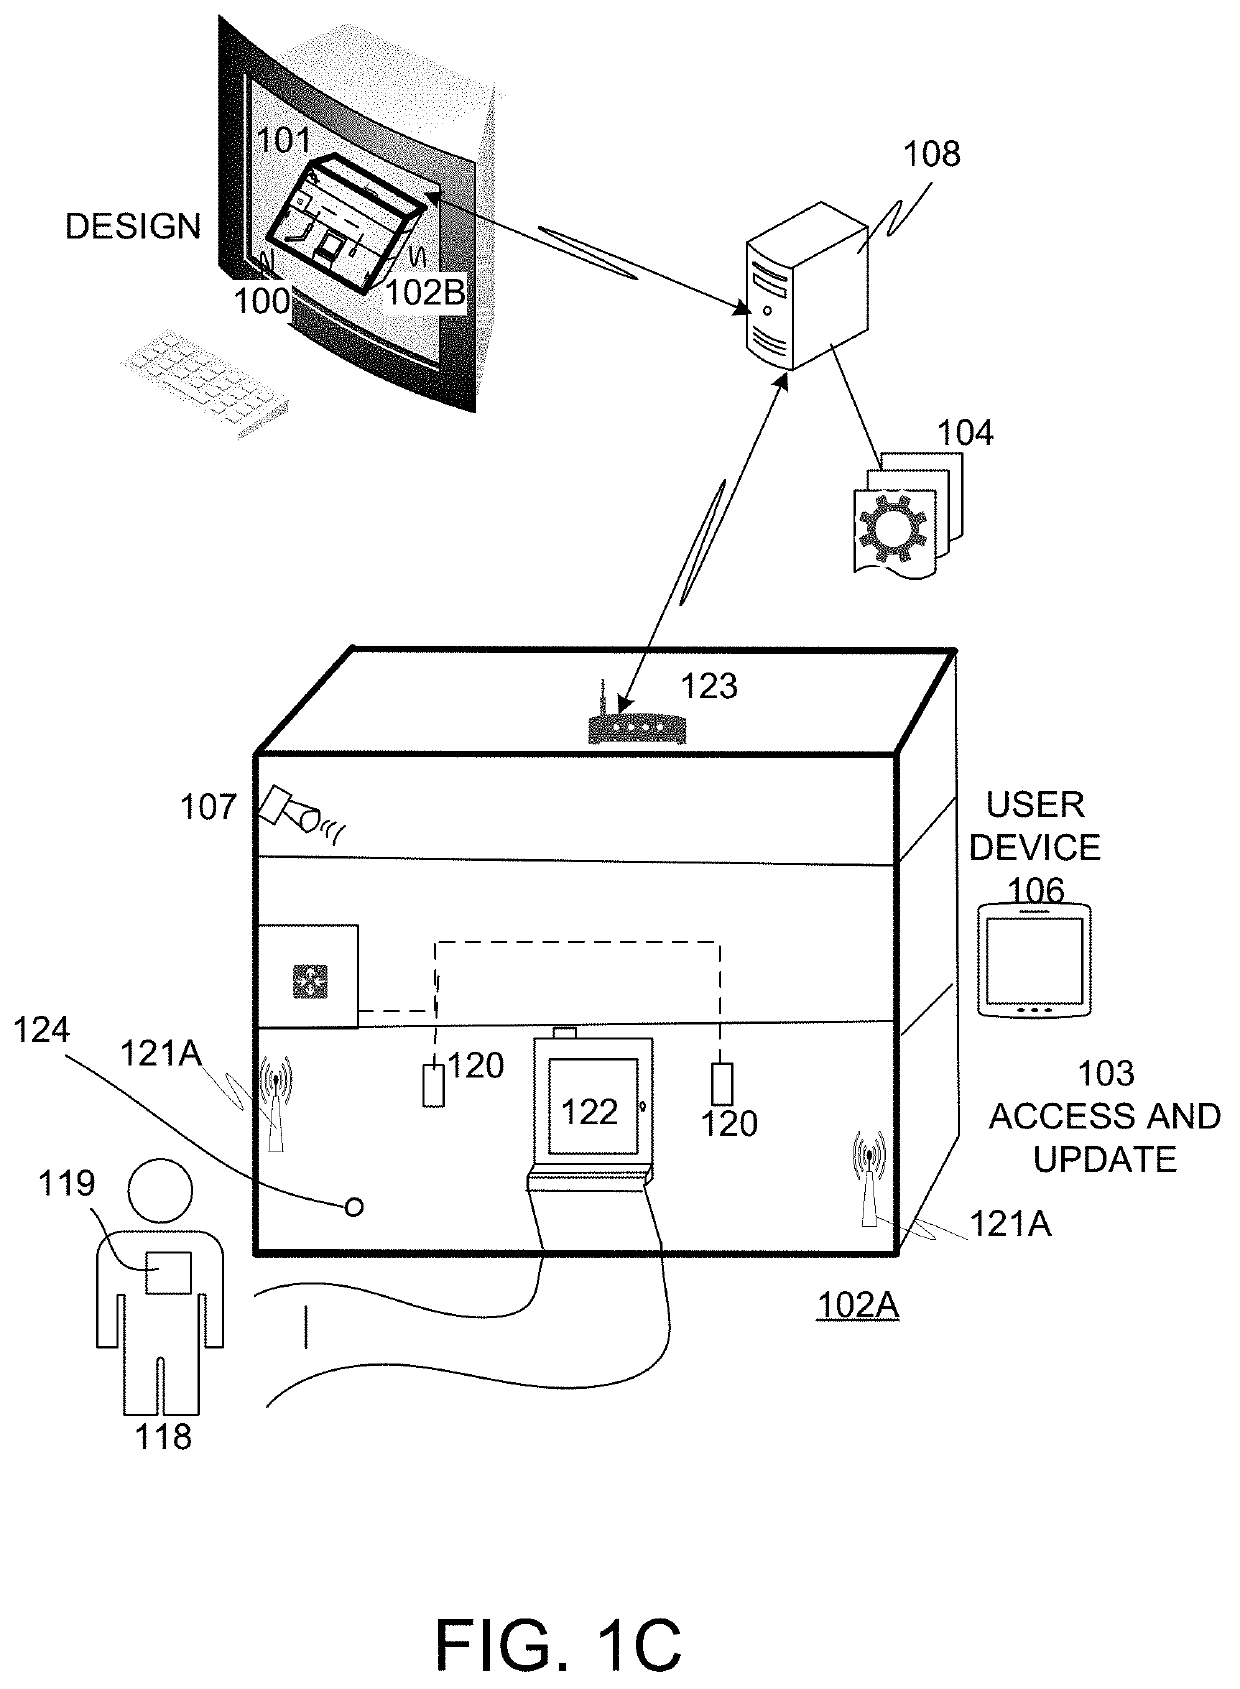 Method and apparatus for enhanced automated wireless orienteering